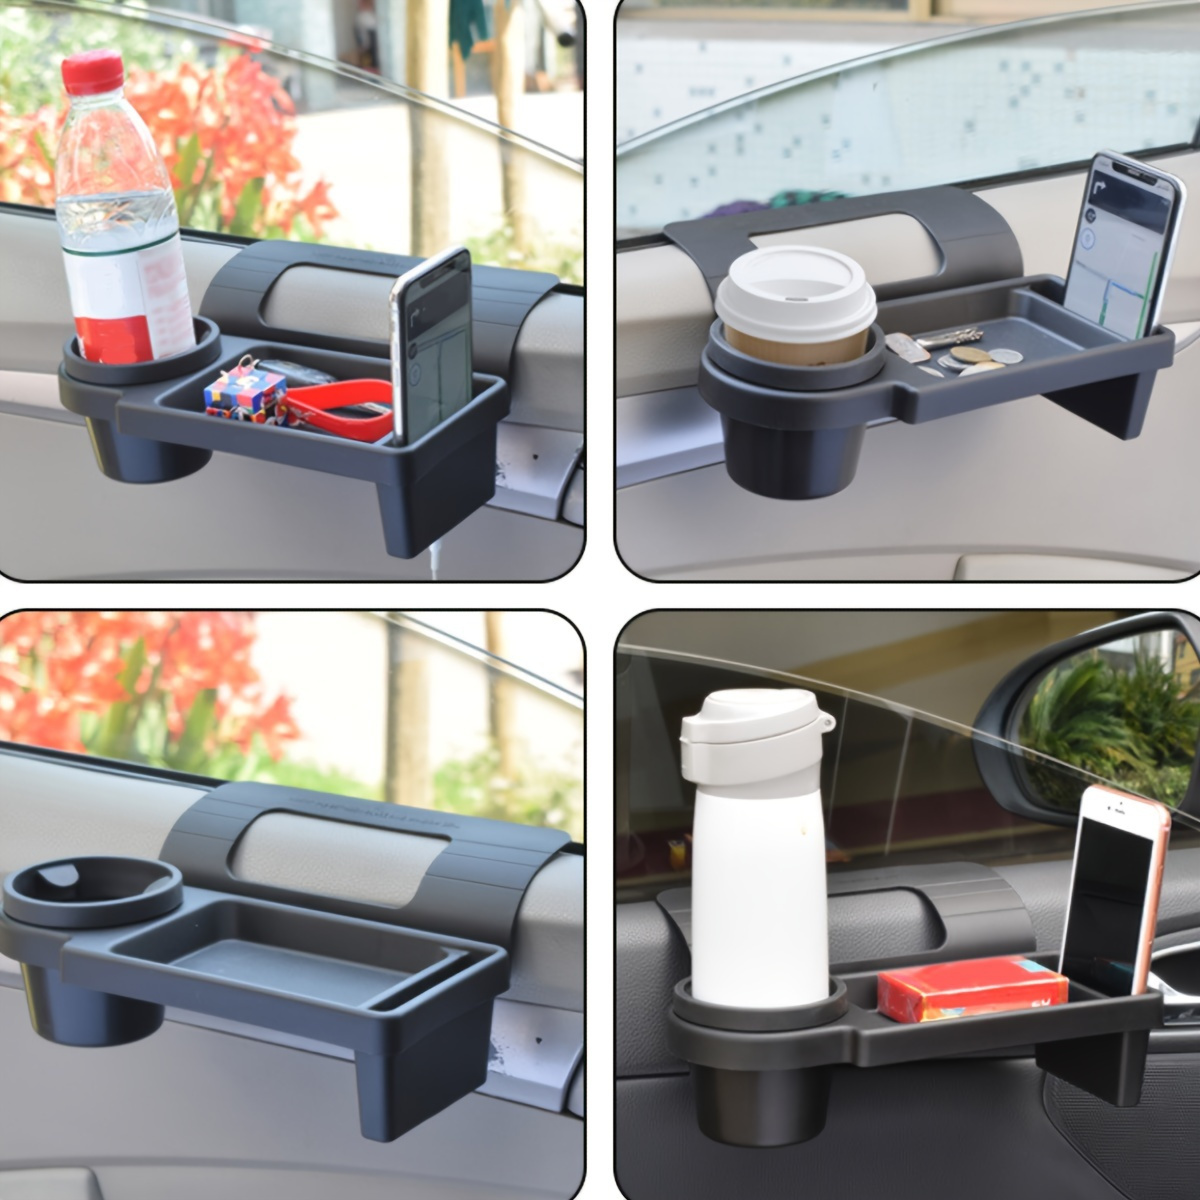 

Versatile Car Organizer With Cup Holder & Phone Slot - Durable Plastic, Adjustable Storage Rack For Cars, Suvs, And Trucks